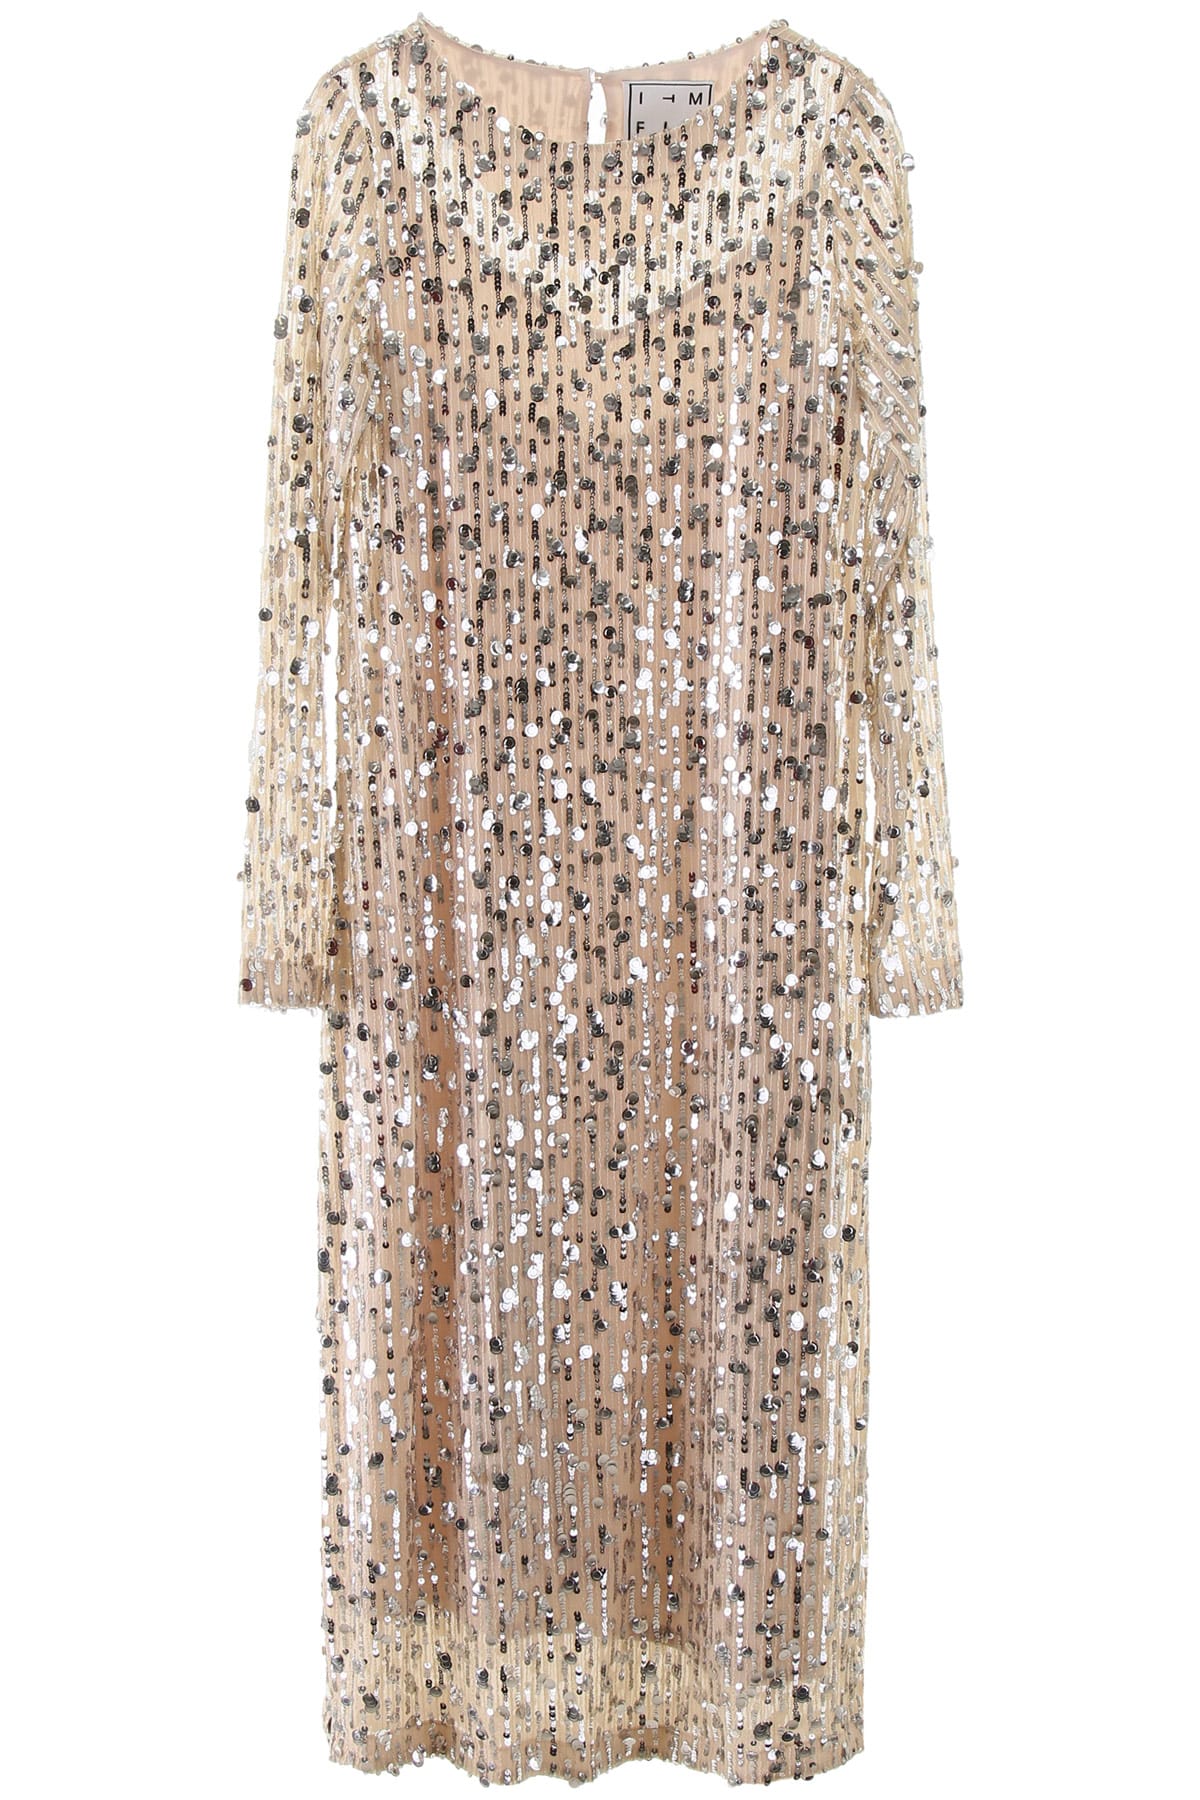 In The Mood For Love Christy Midi Dress With Sequins